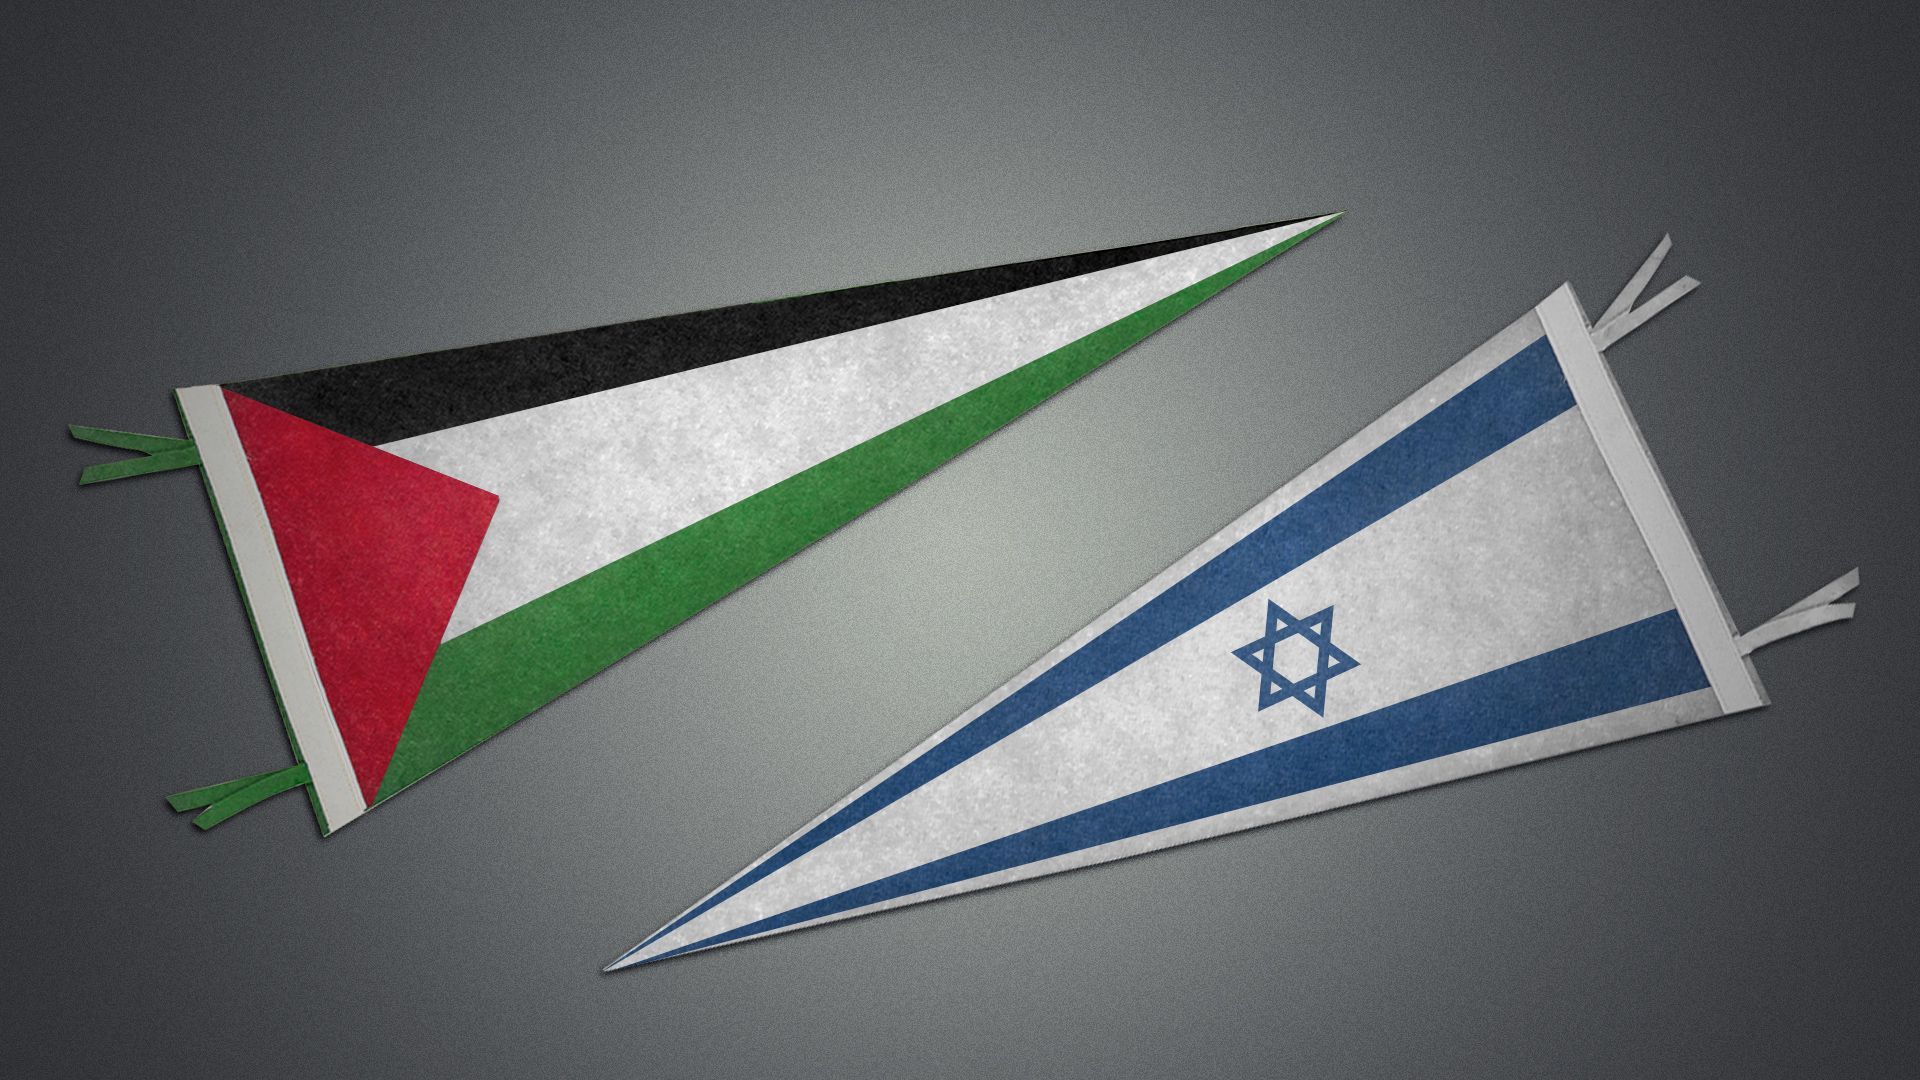 Illustration of Israeli and Palestinian flags stylized as college pennants on a wall. 